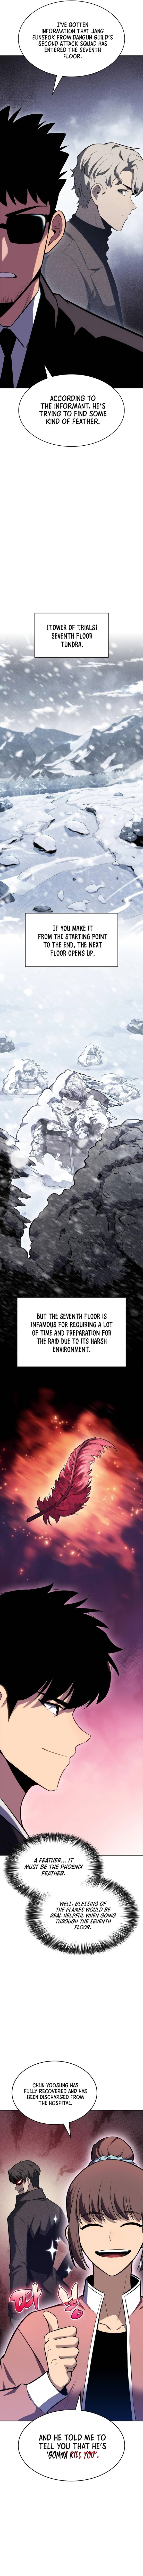 Solo Max-Level Newbie Chapter 83 page 7 - MangaWeebs.in